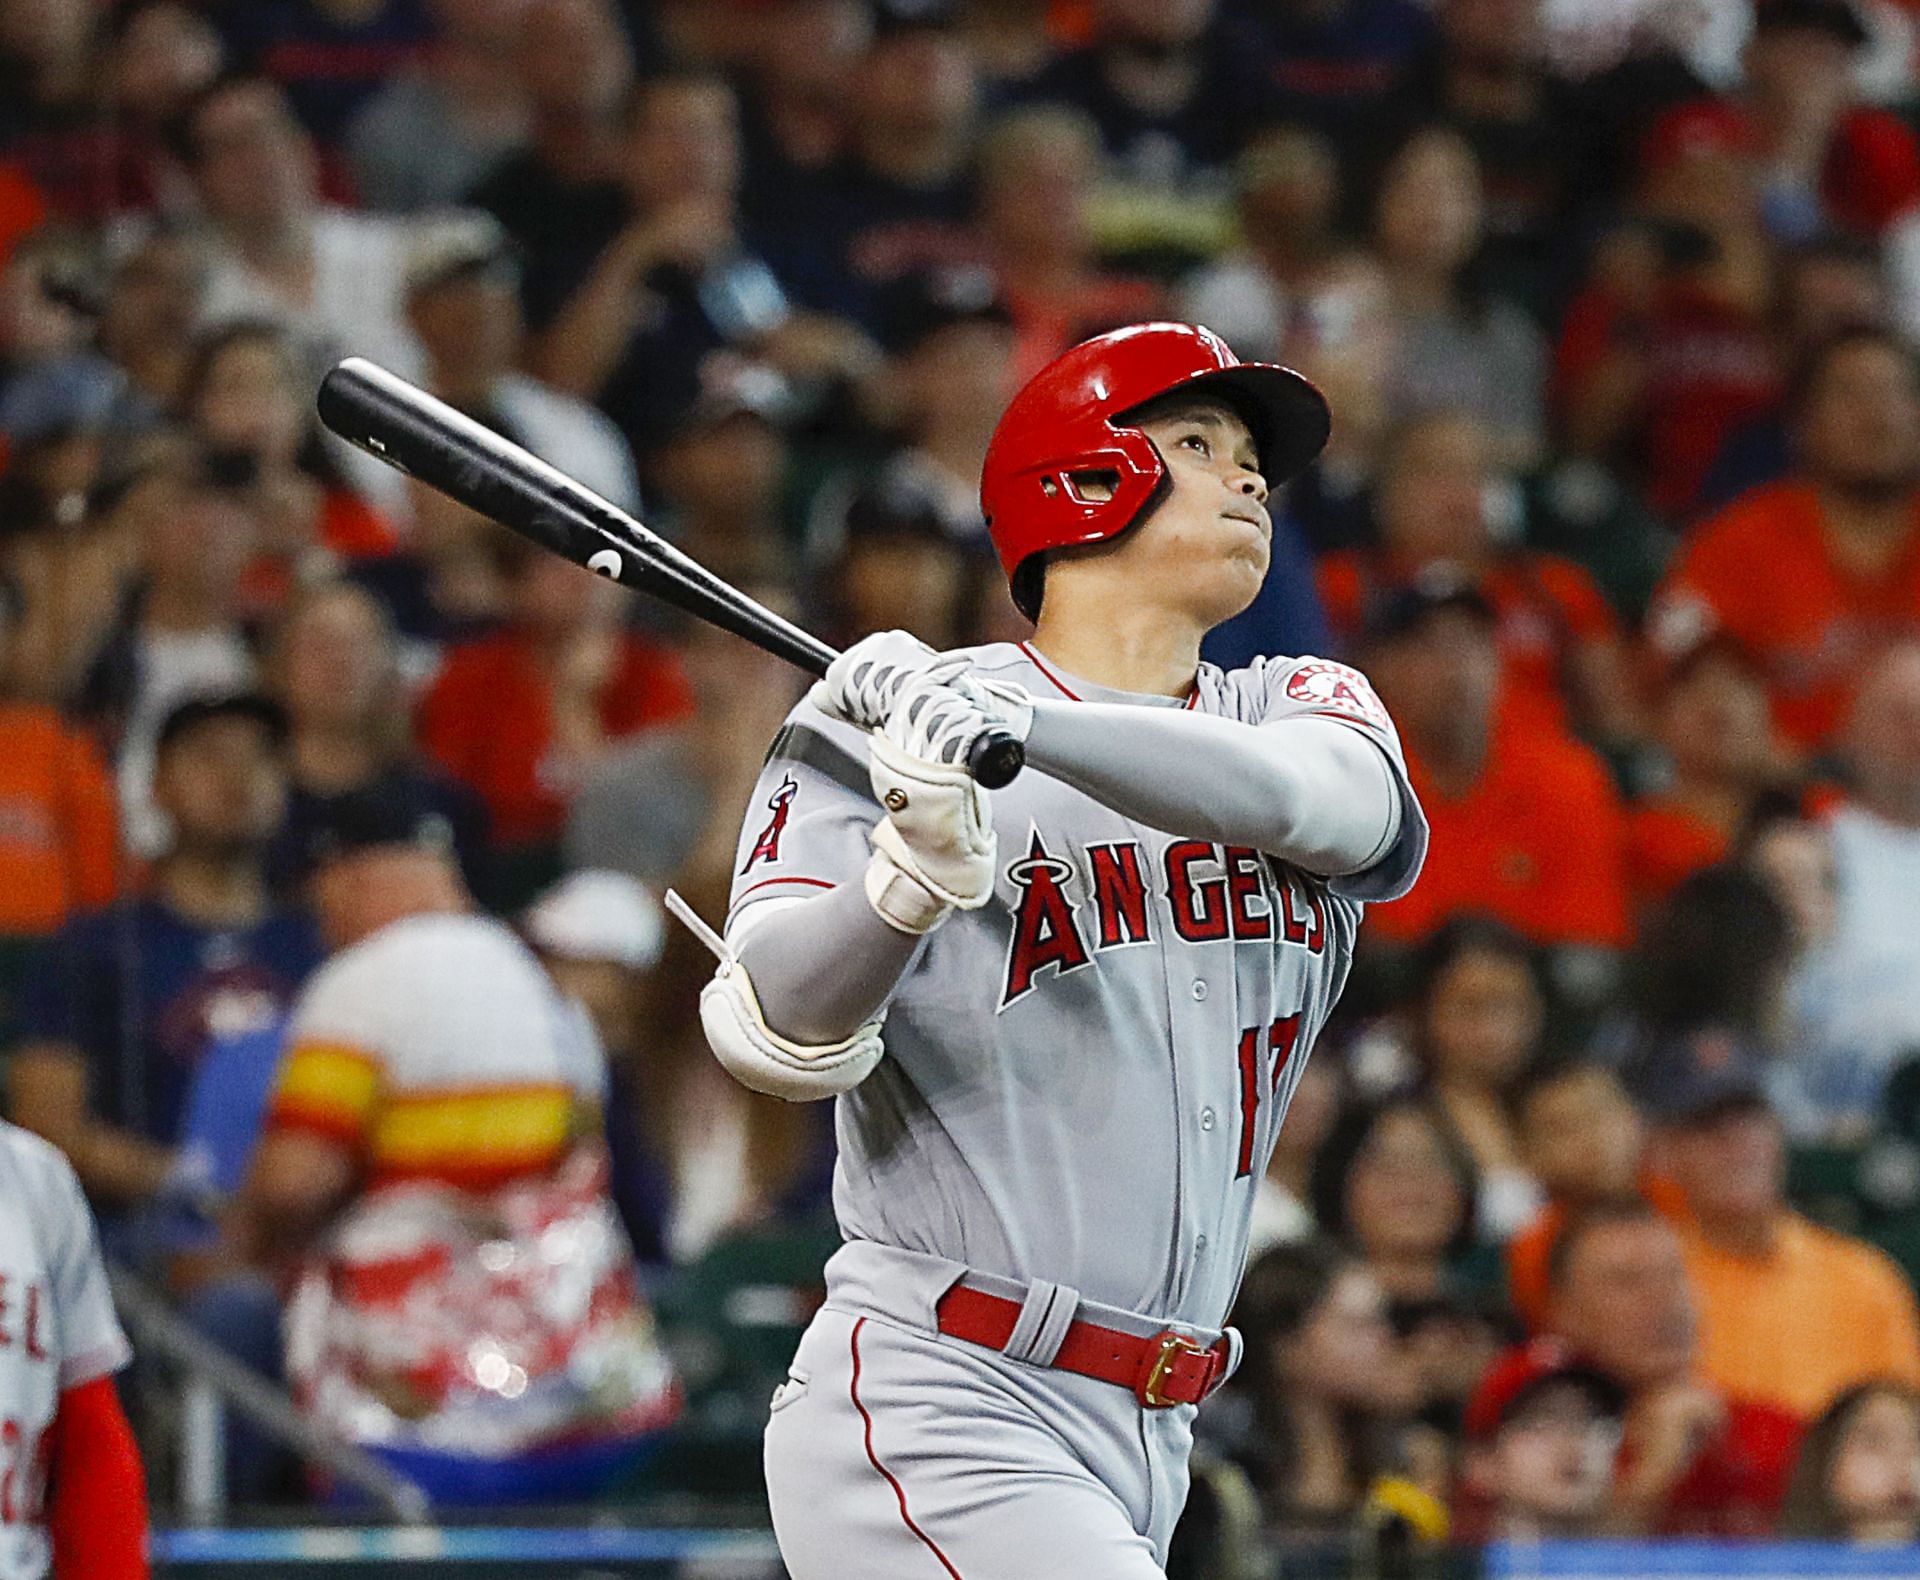 Shohei Ohtani blasts a towering home run into the upper decks in right field during tonight&#039;s Los Angeles Angels v Houston Astros game.